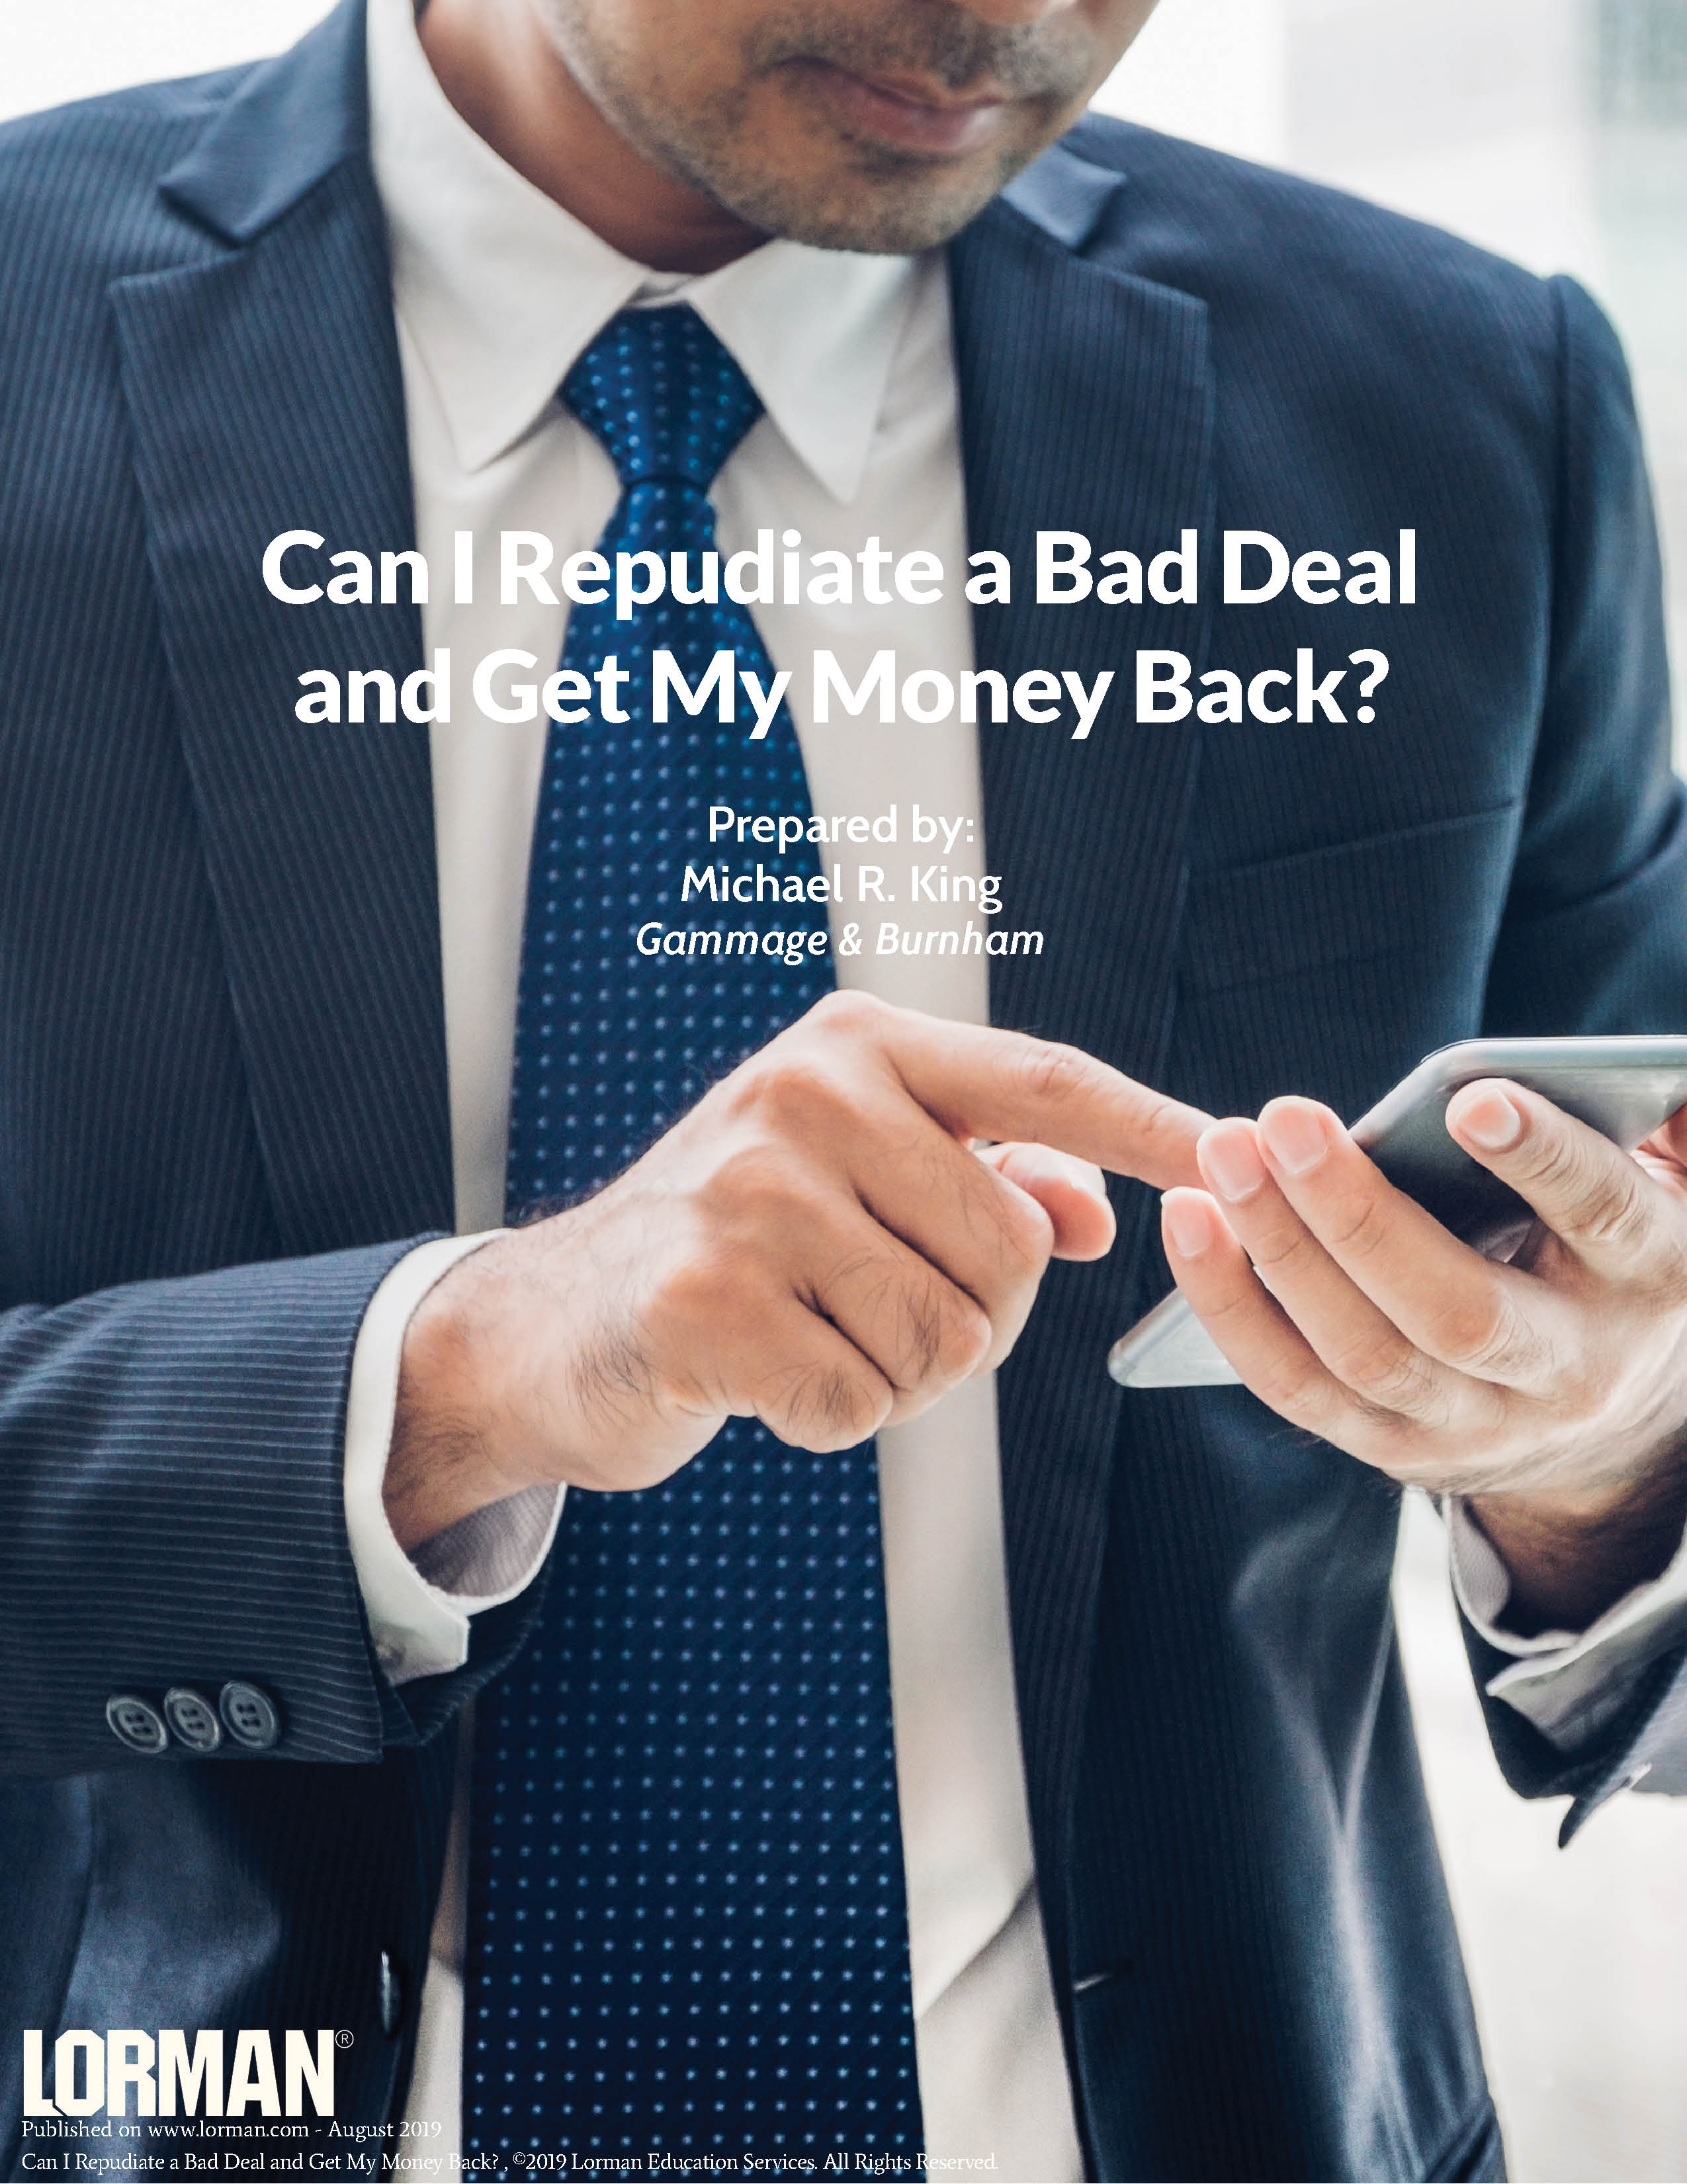 Can I Repudiate a Bad Deal and Get My Money Back?